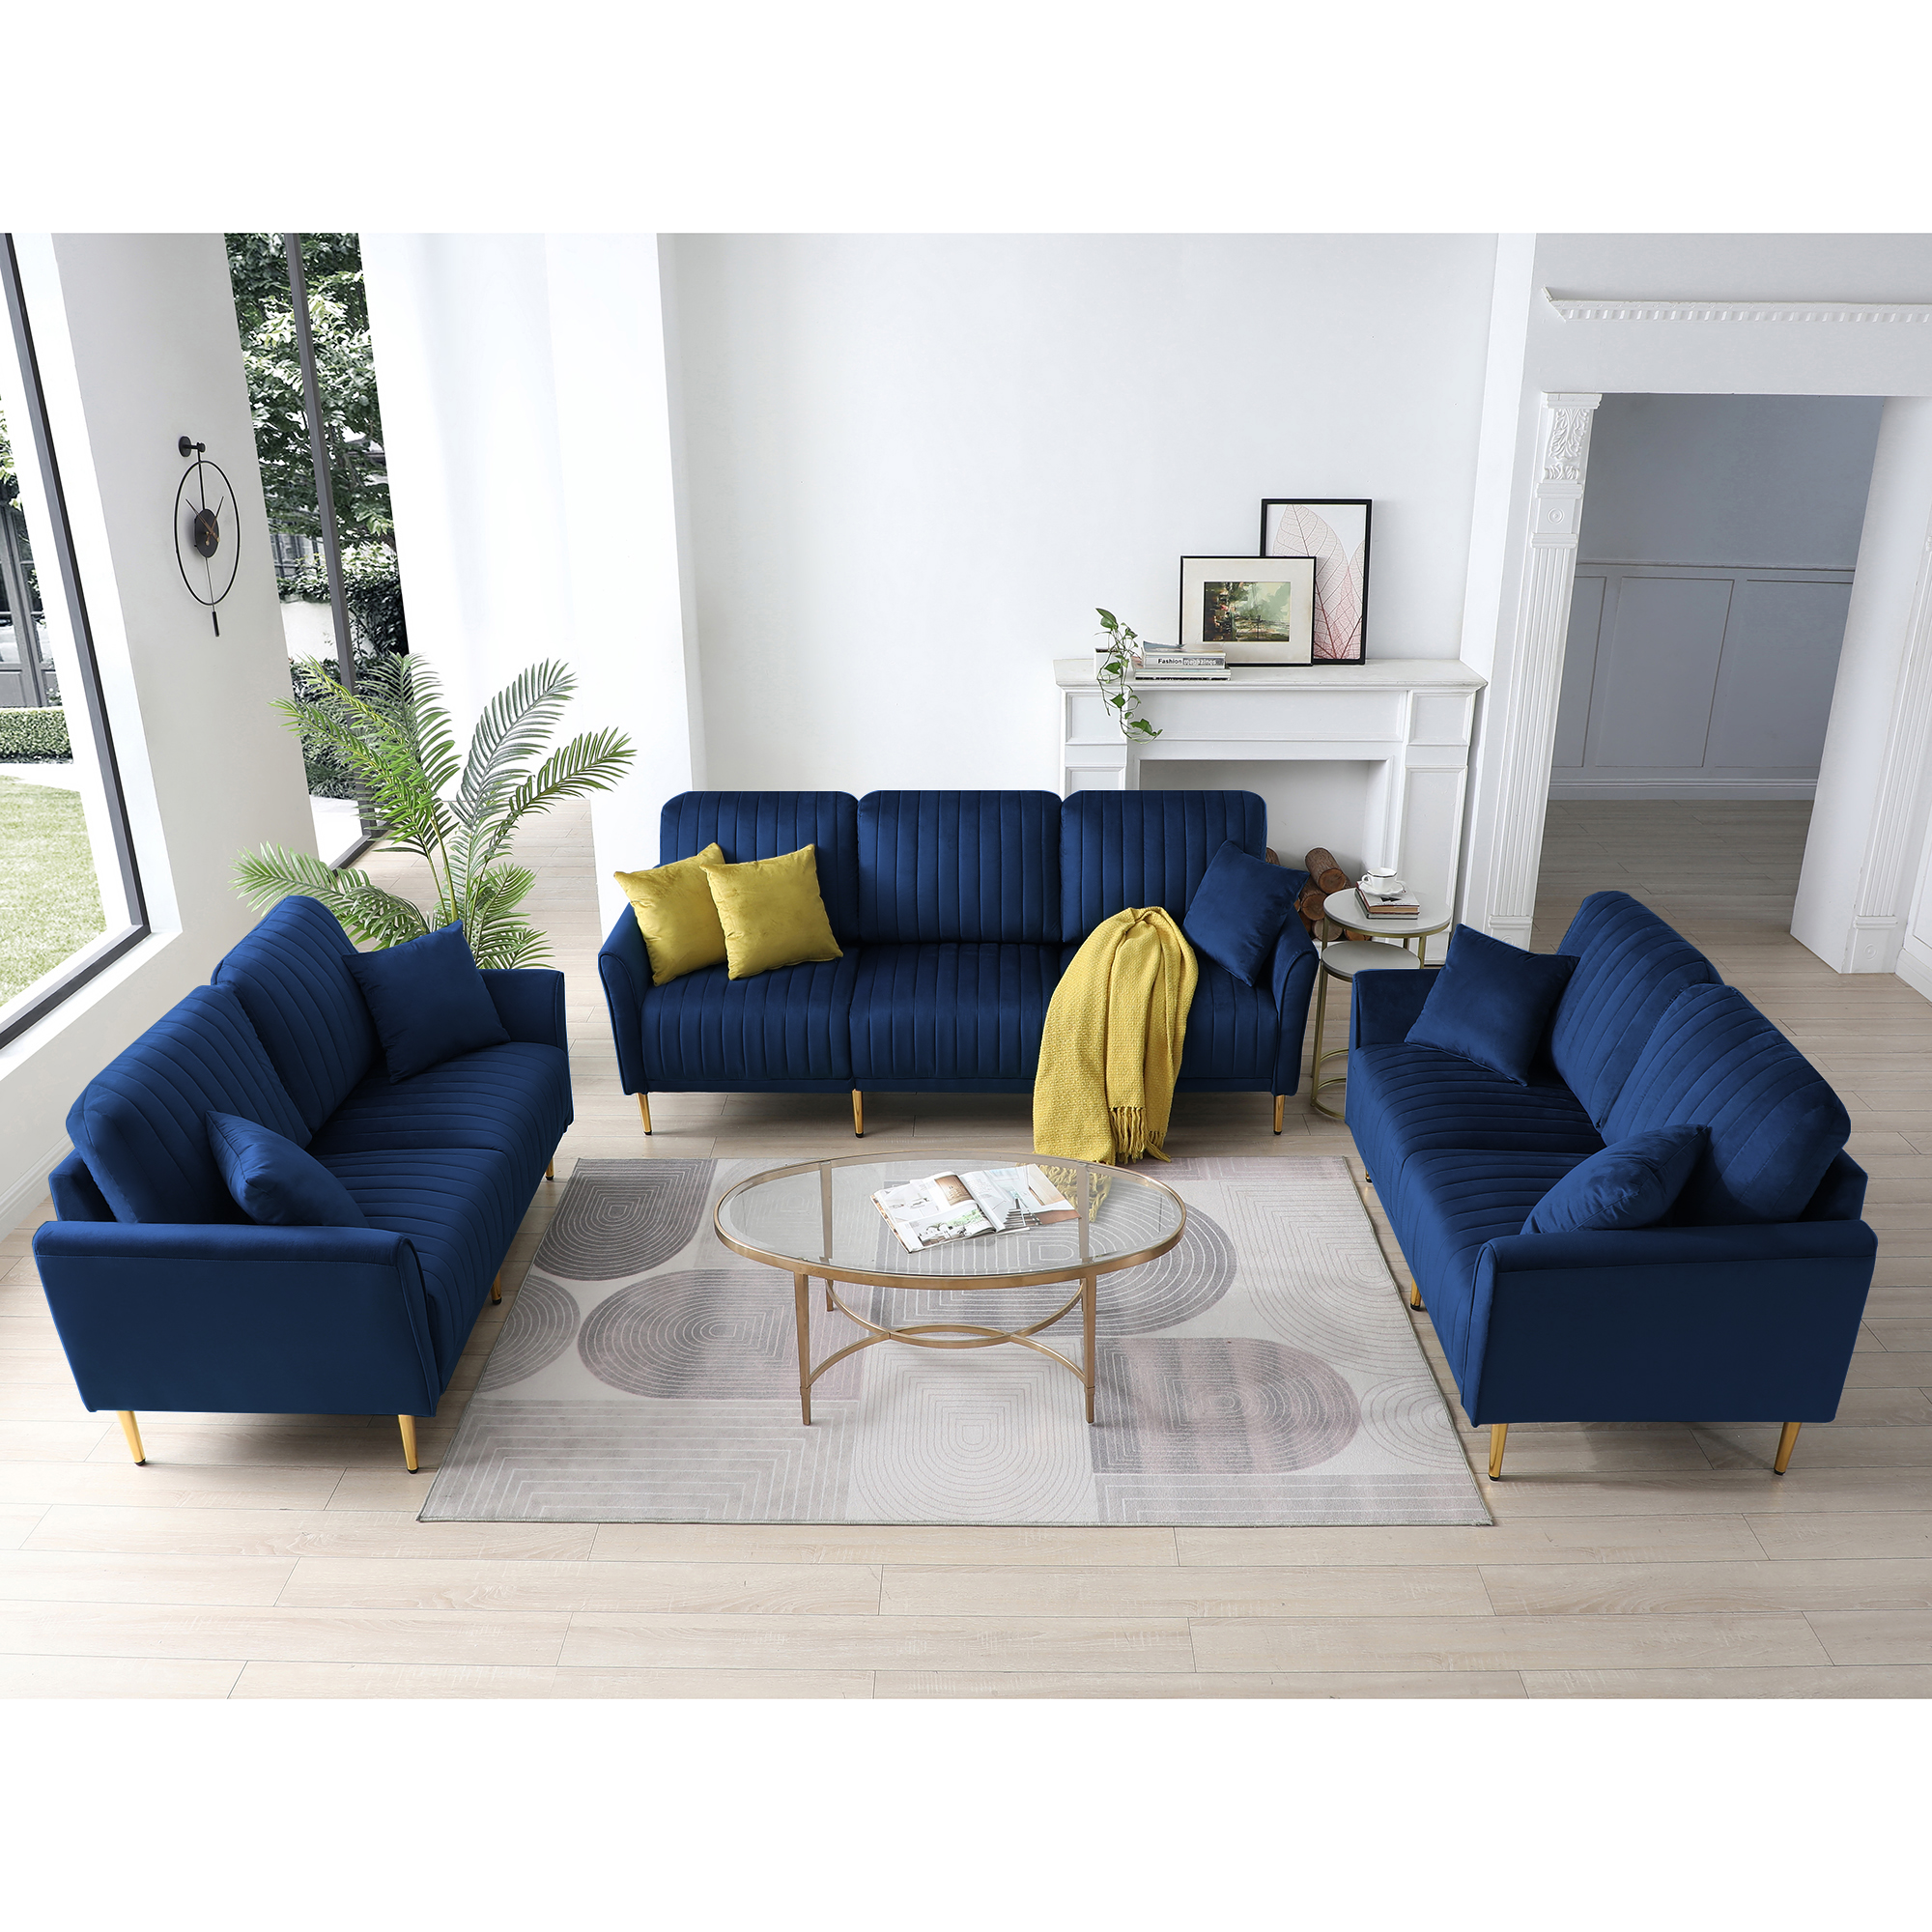 Velvet Fabric Sofa Couch Set, Mid-Century 3-Seat Tufted Love Seat for Living Room, Bedroom, Office, Apartment, Dorm, Studio and Small Space, 7 Pillows Included(Navy Blue),3+2+2 Seater